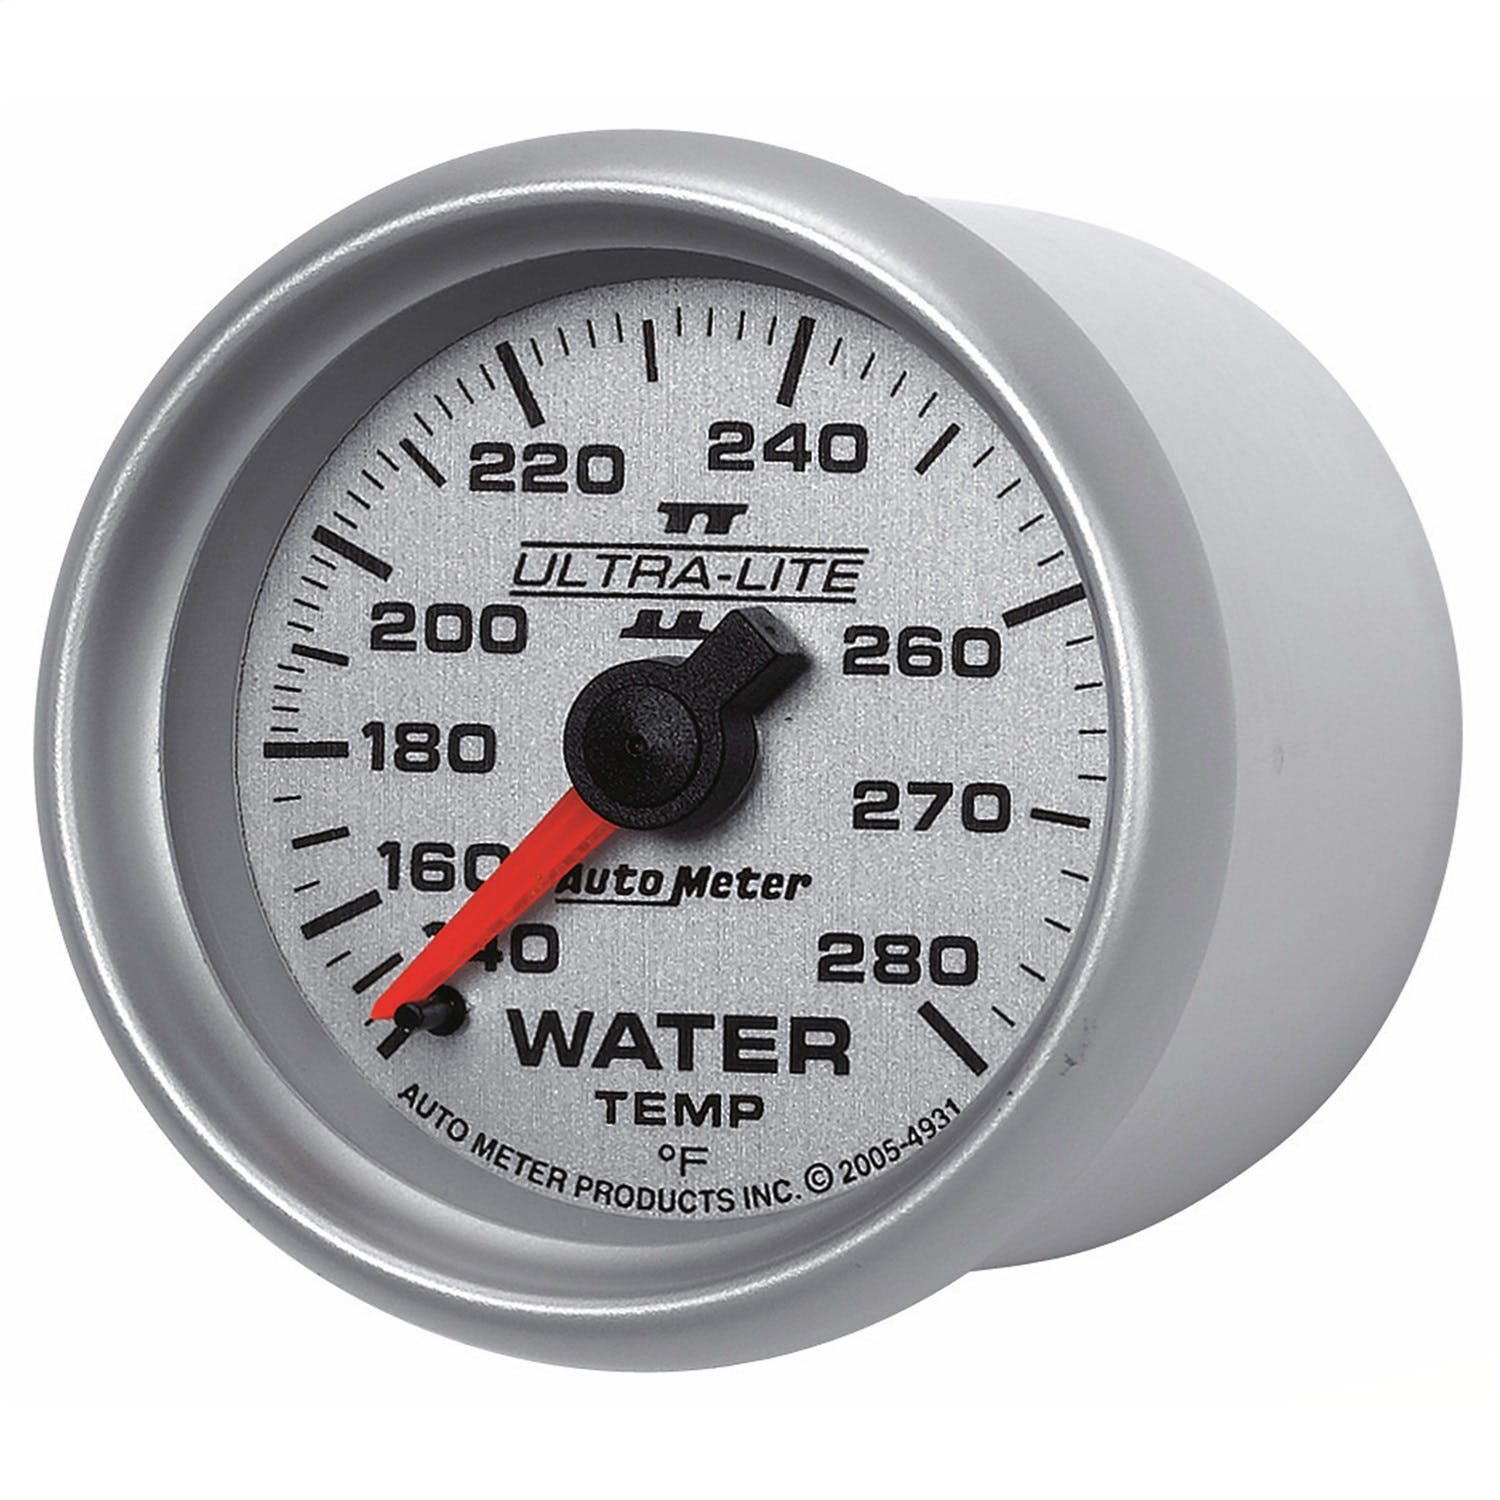 AutoMeter Products 4931 Water Temp 140-280 (FS)